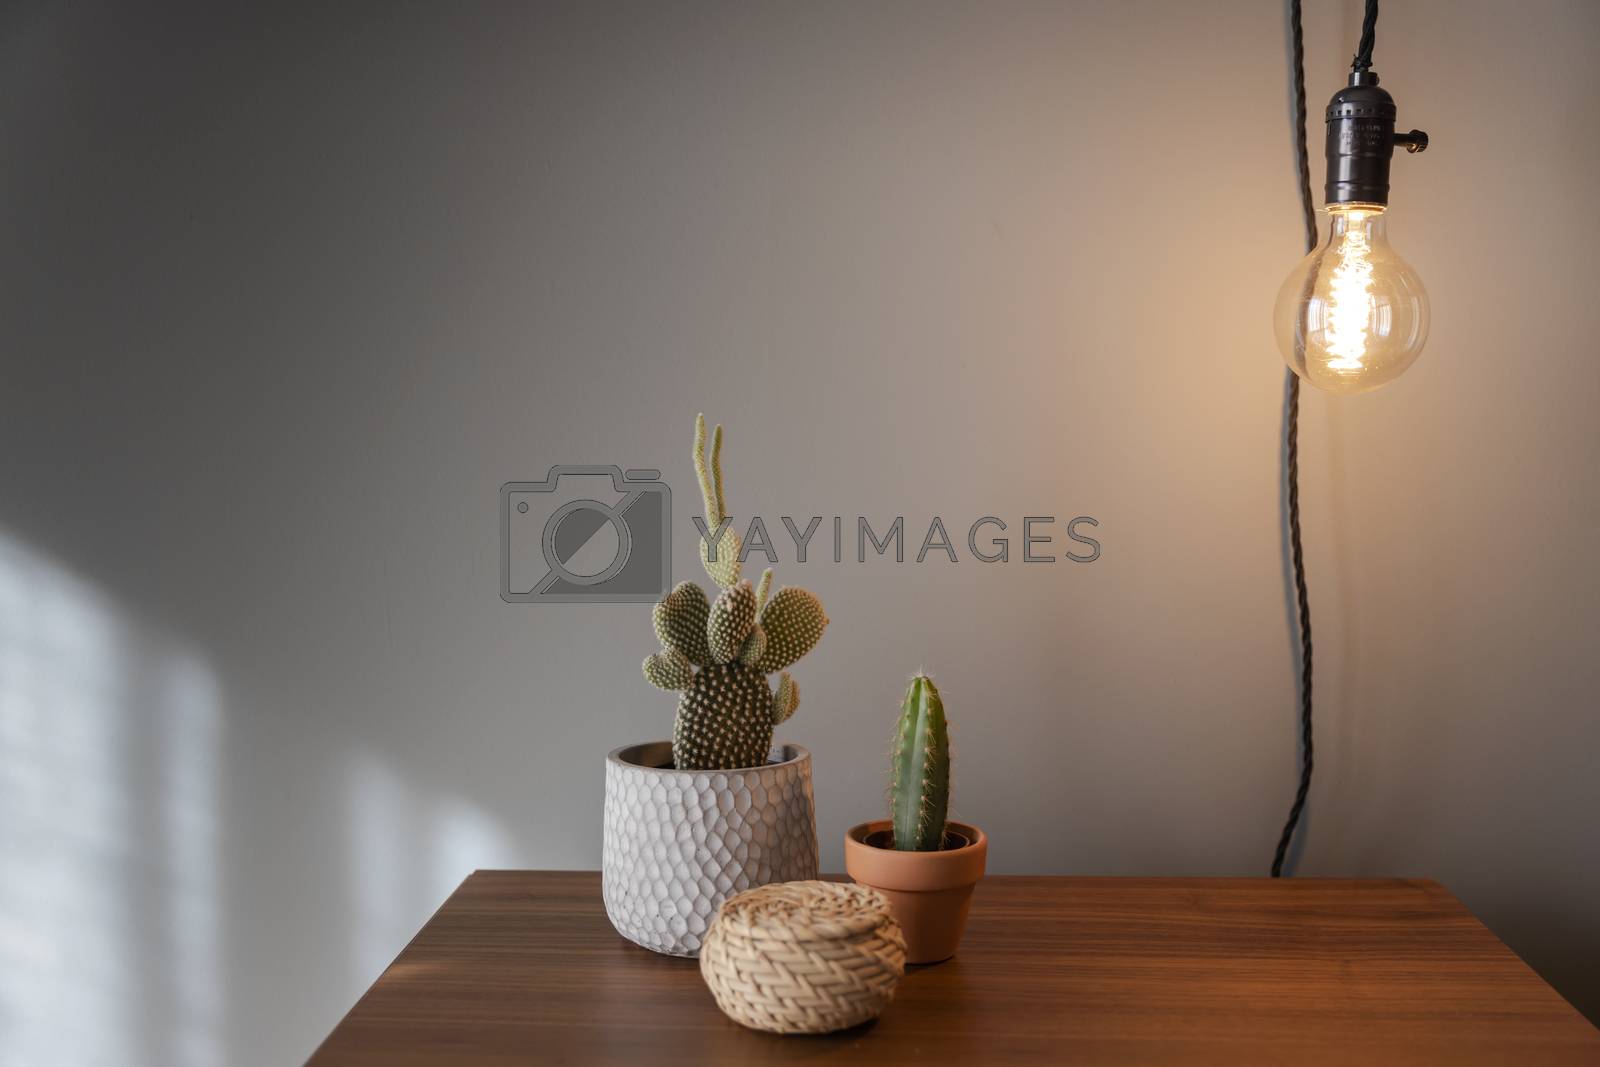 Royalty free image of Cactus Plants decoration by Iko